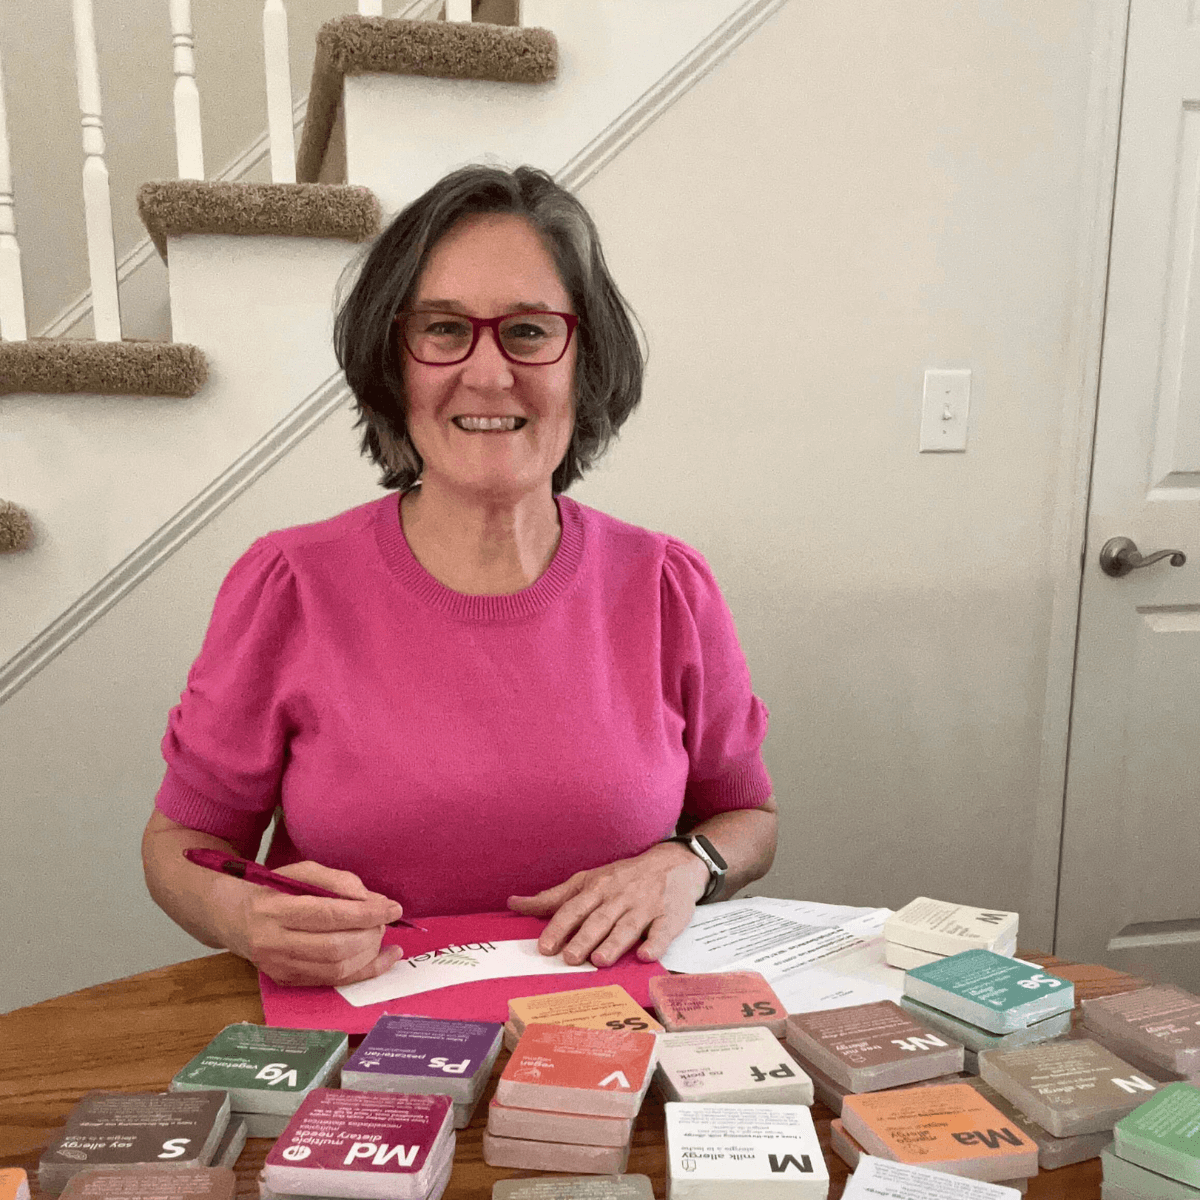 Smiling woman sitting at a table wearing a shortsleeve pink sweater. On the table in front of her are piles of dietary need meal cards in a variety of colors and options.